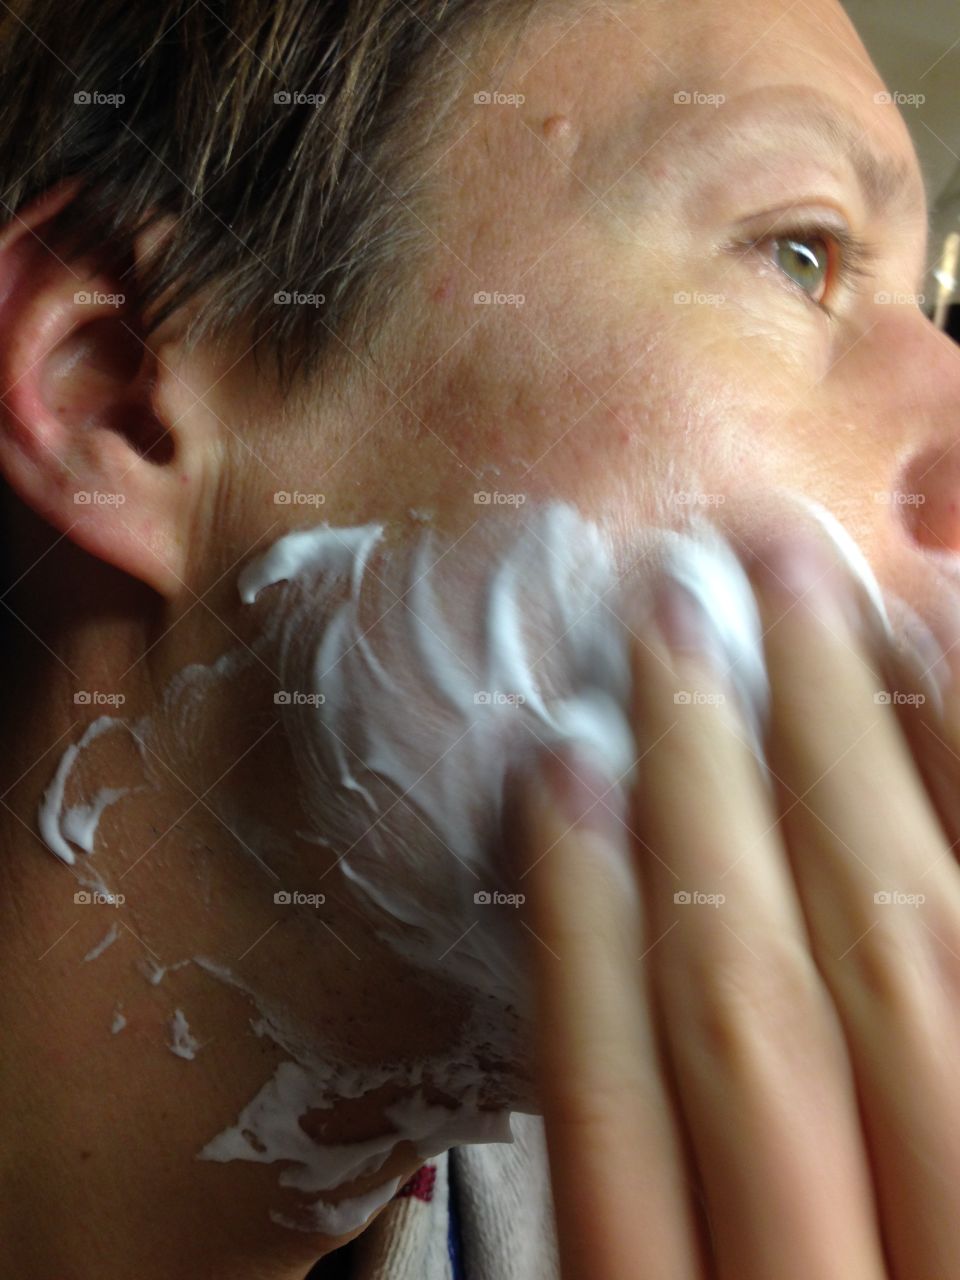 Applying shaving cream, an important part of the daily shaving ritual.